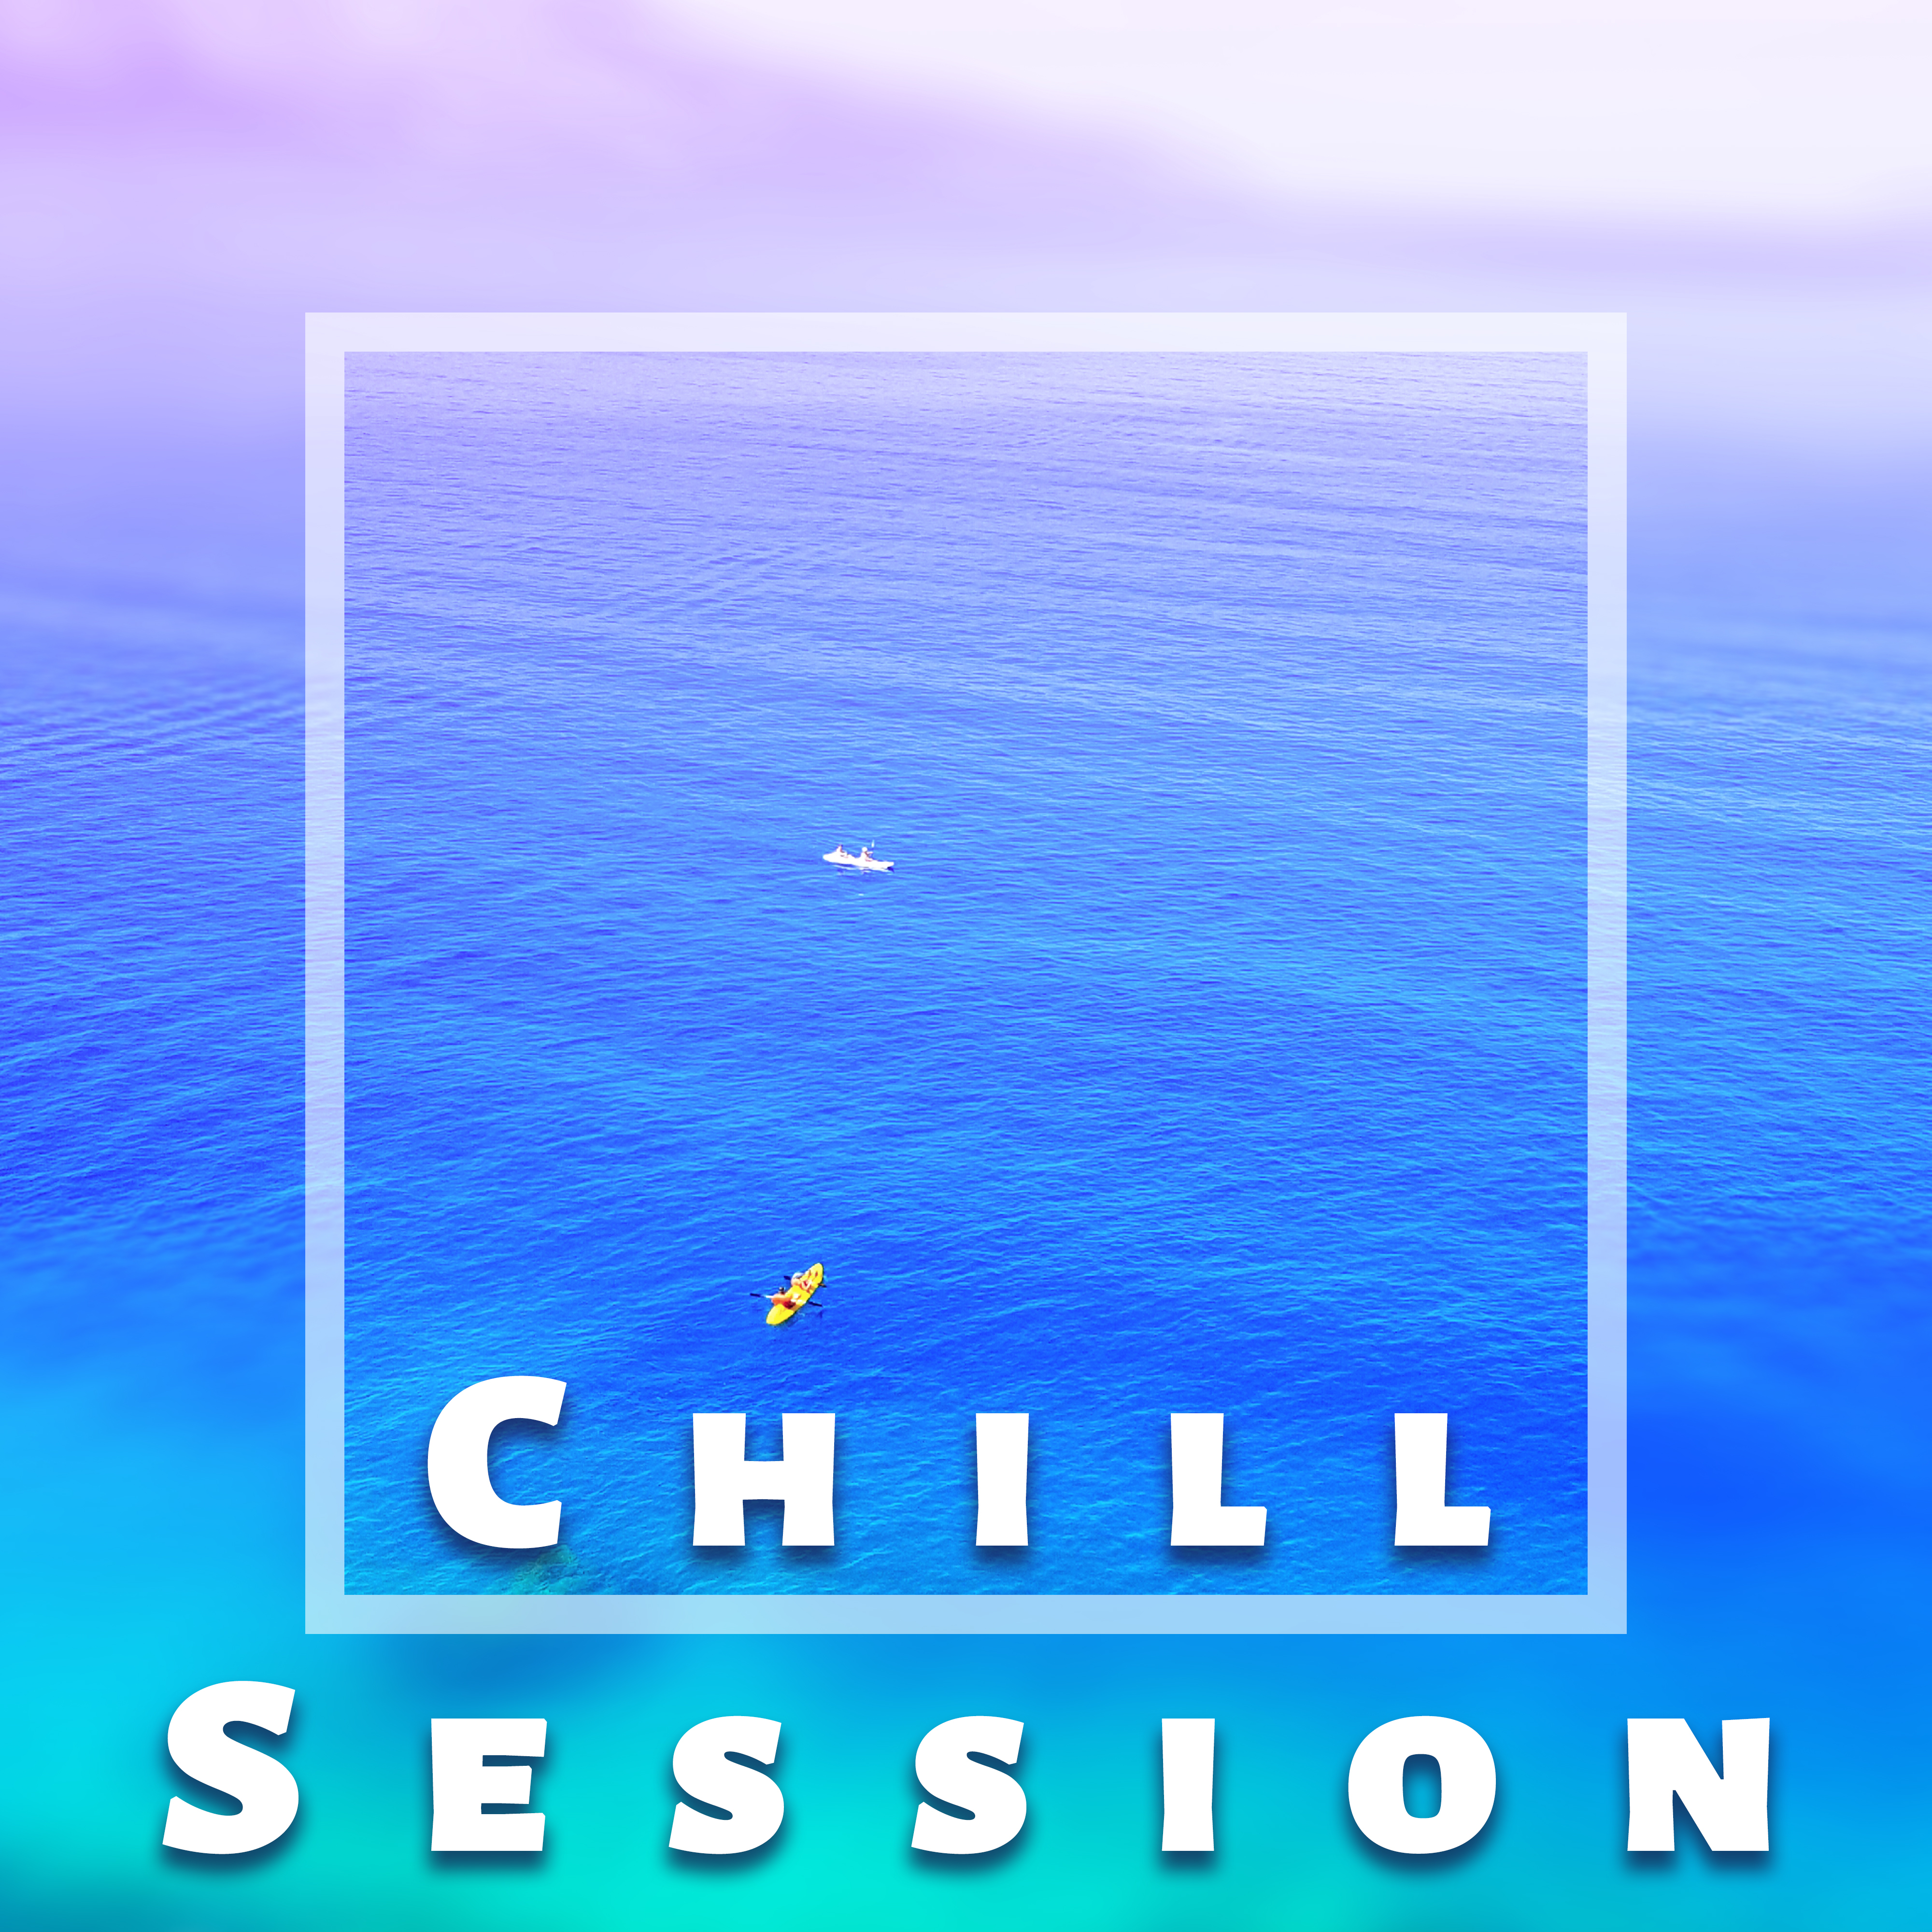 Chill Session – Beach Lounge, Chill Out 2017, Relax, Summertime, Beach Music, Chill Paradise, Tropical Rest